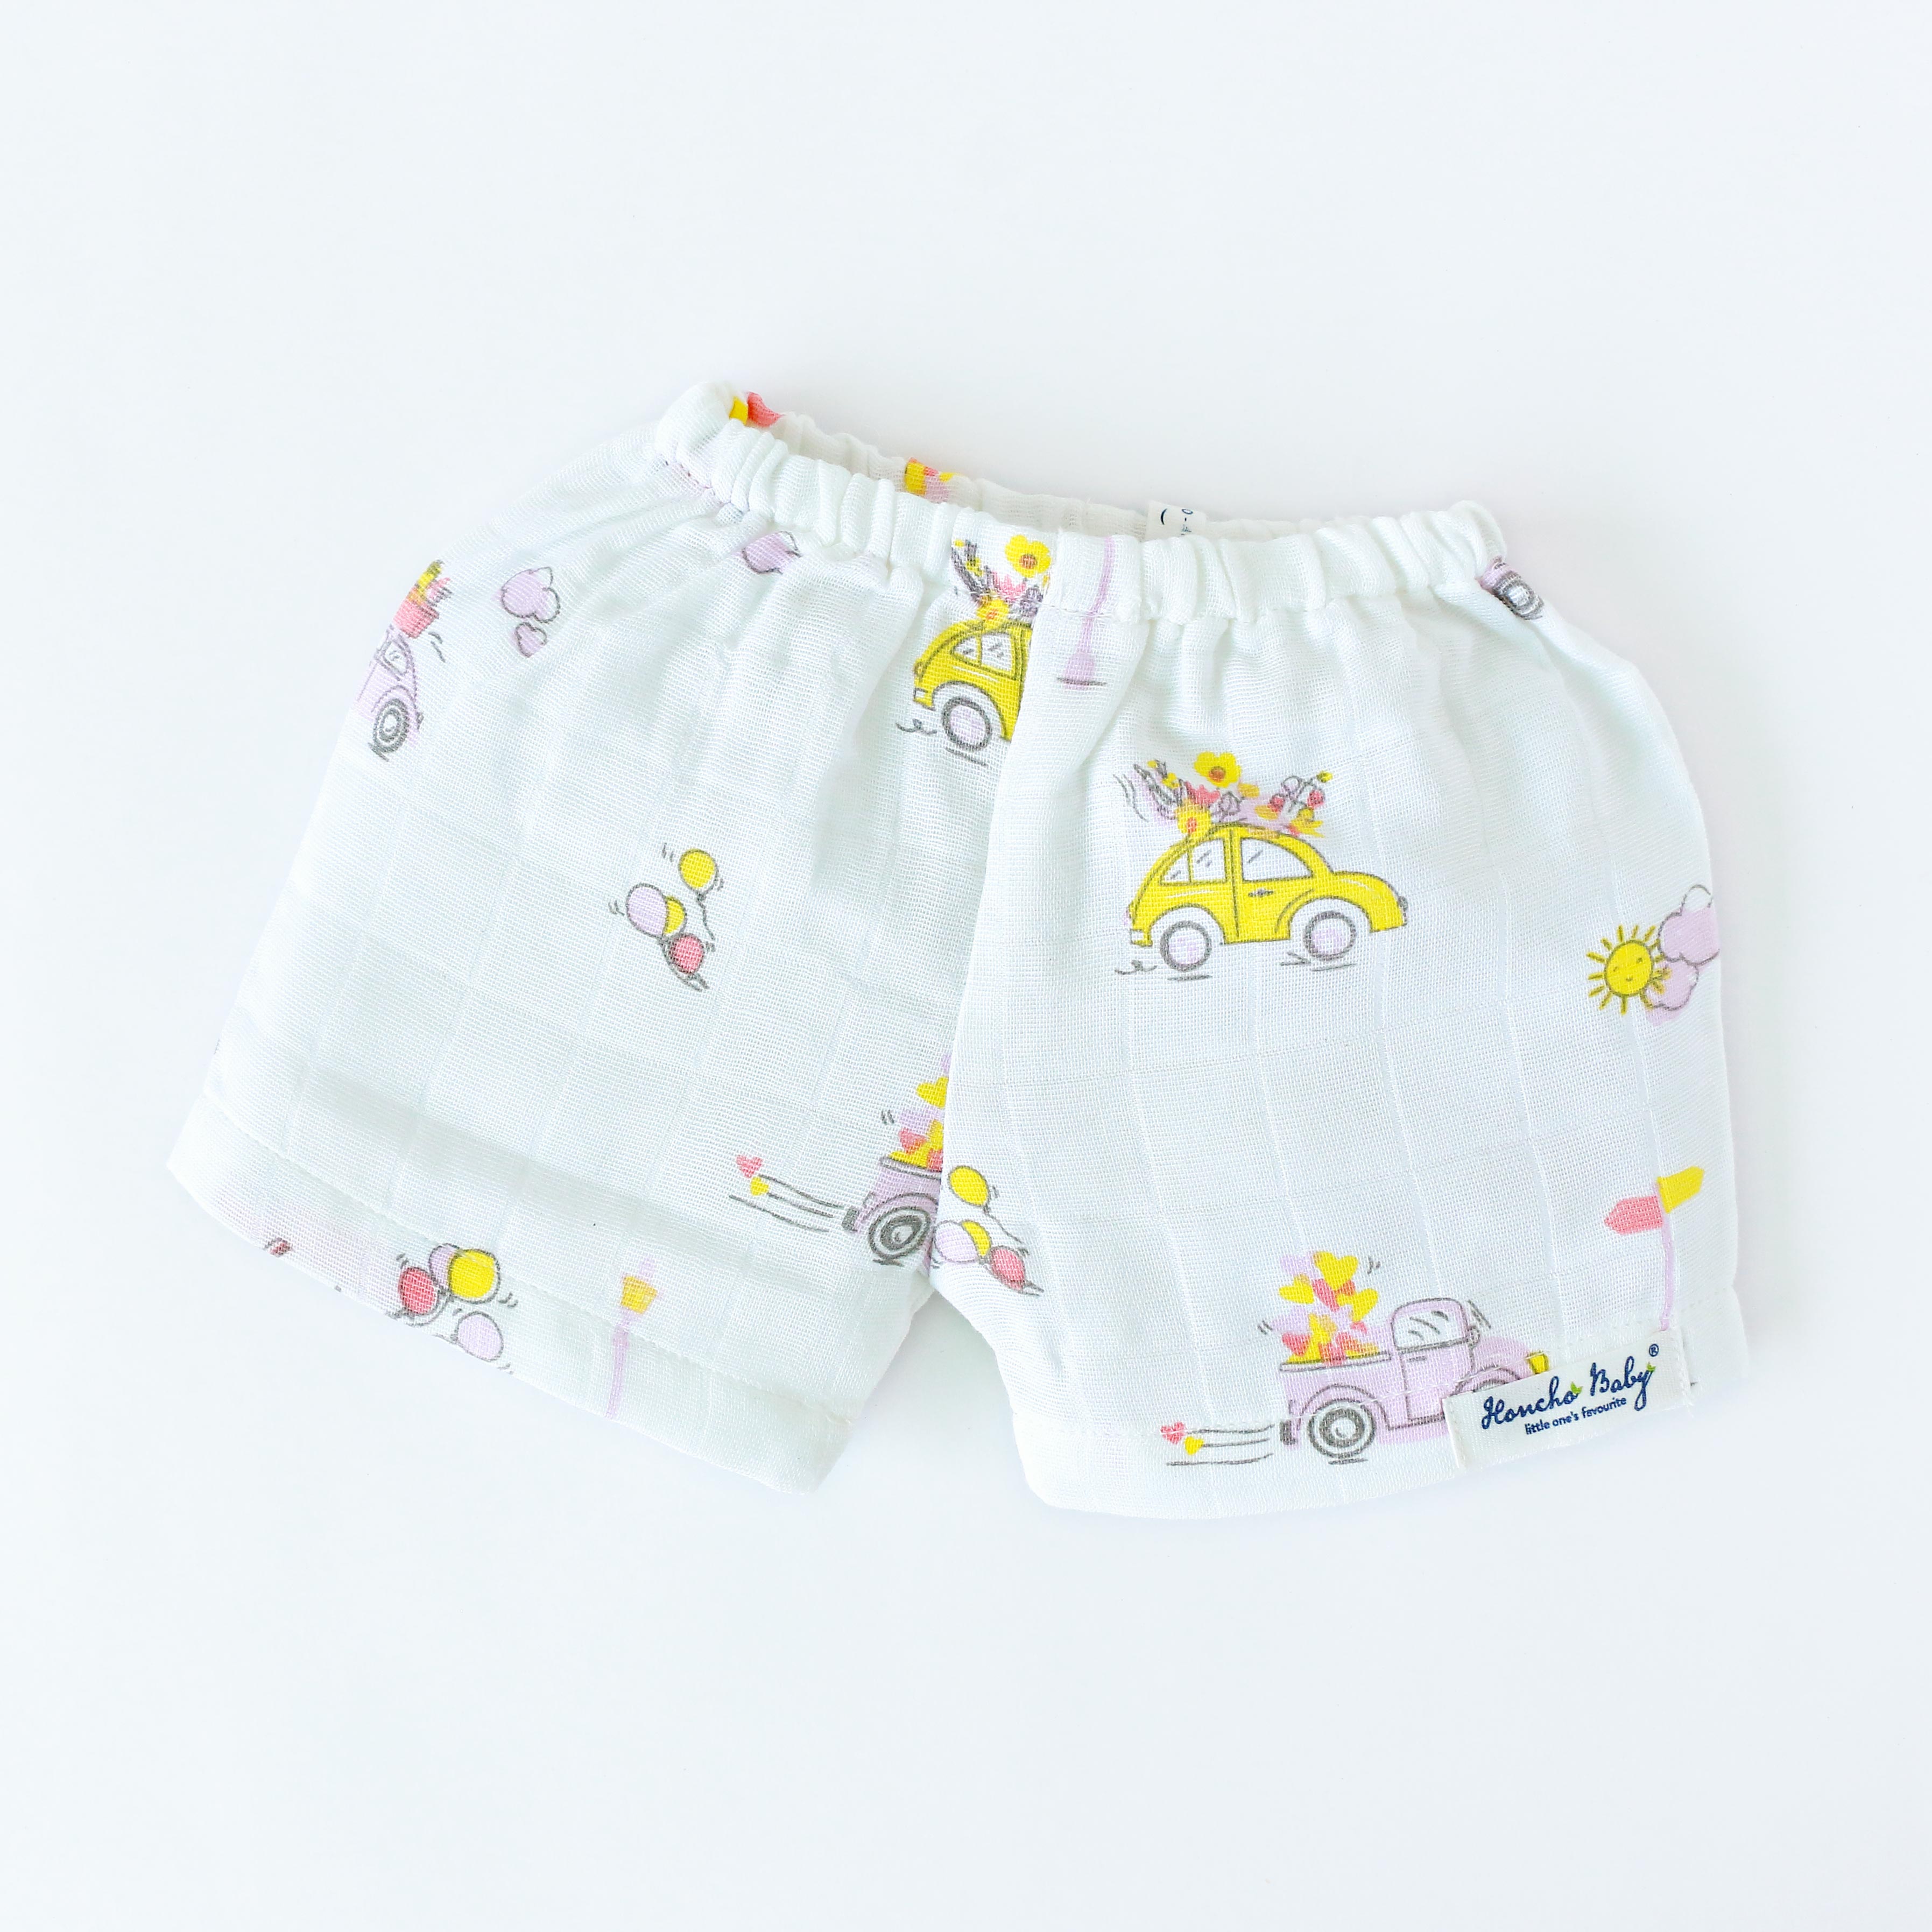 Unisex Comfy Shorts - 5 pack ( 0 - 3 years ) NEW